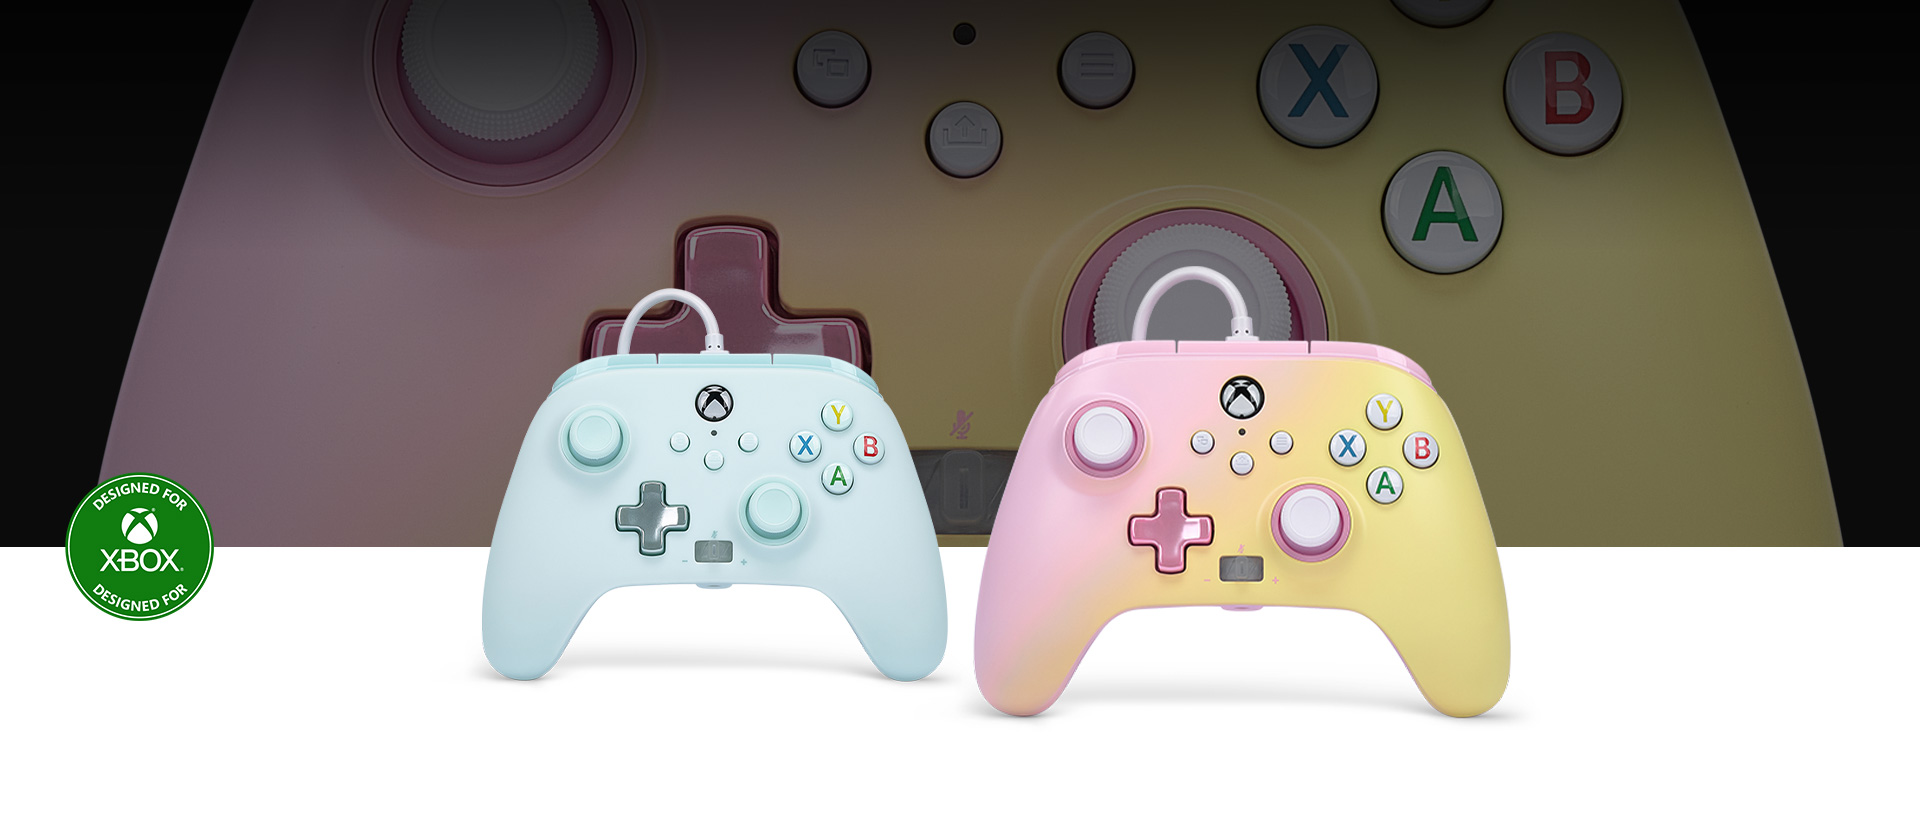 Designed for Xbox logo, Pink Lemonade controller in front with the Cotton Candy Blue controller beside it